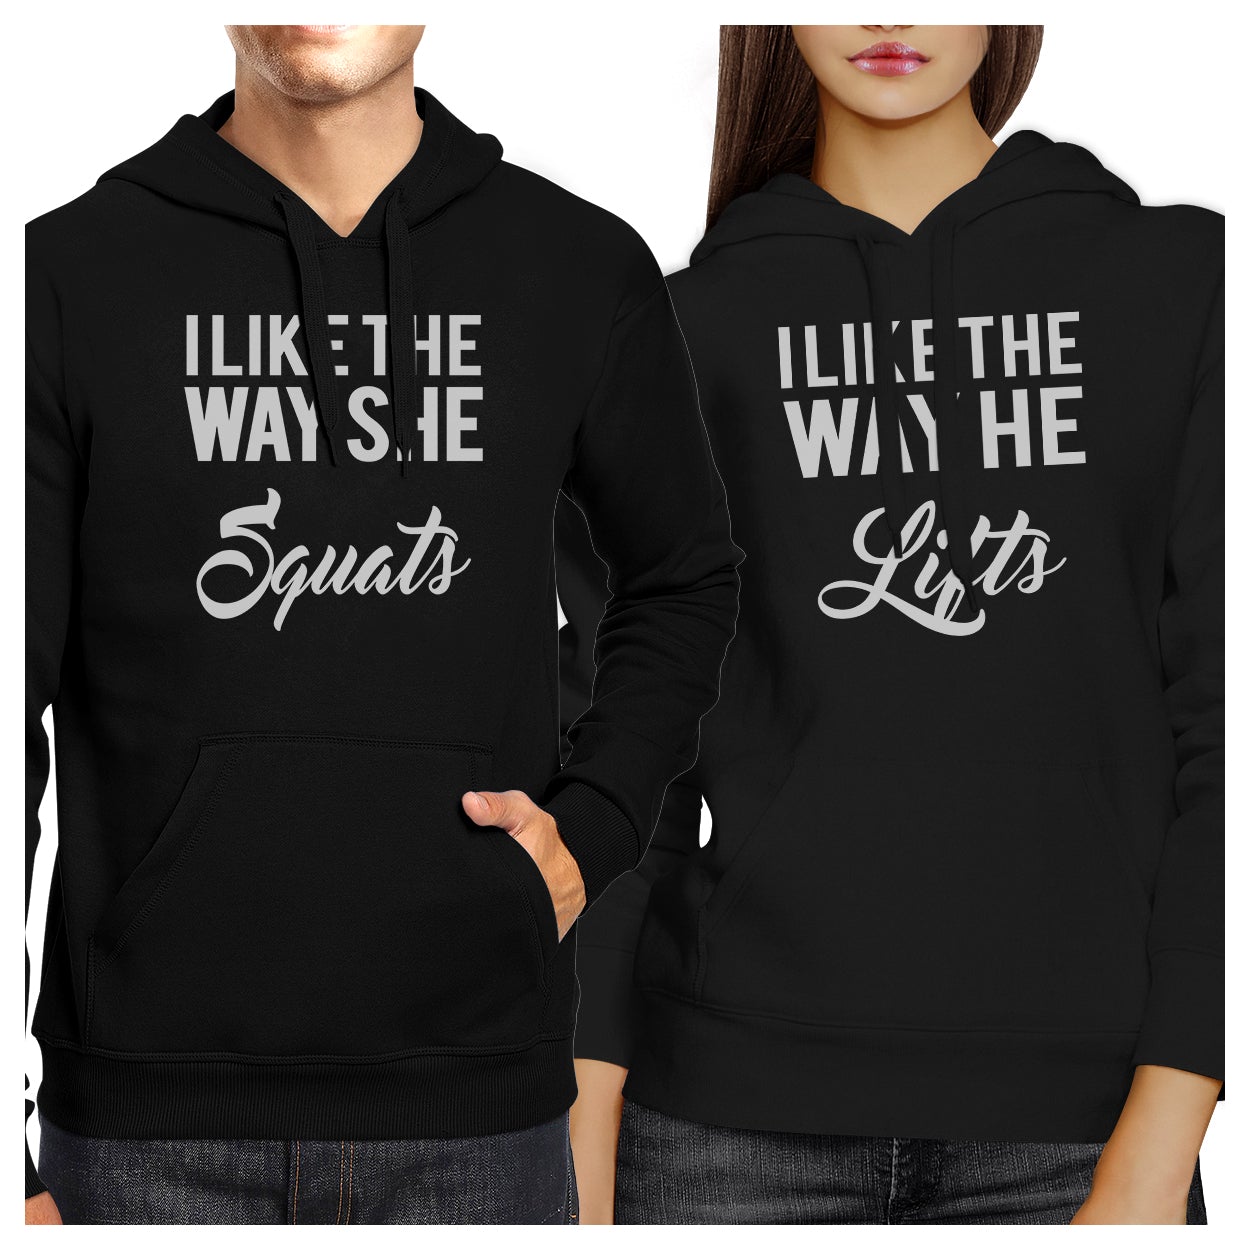 Squats Lifts Black Matching Hoodies Pullover Funny Fitness Gifts